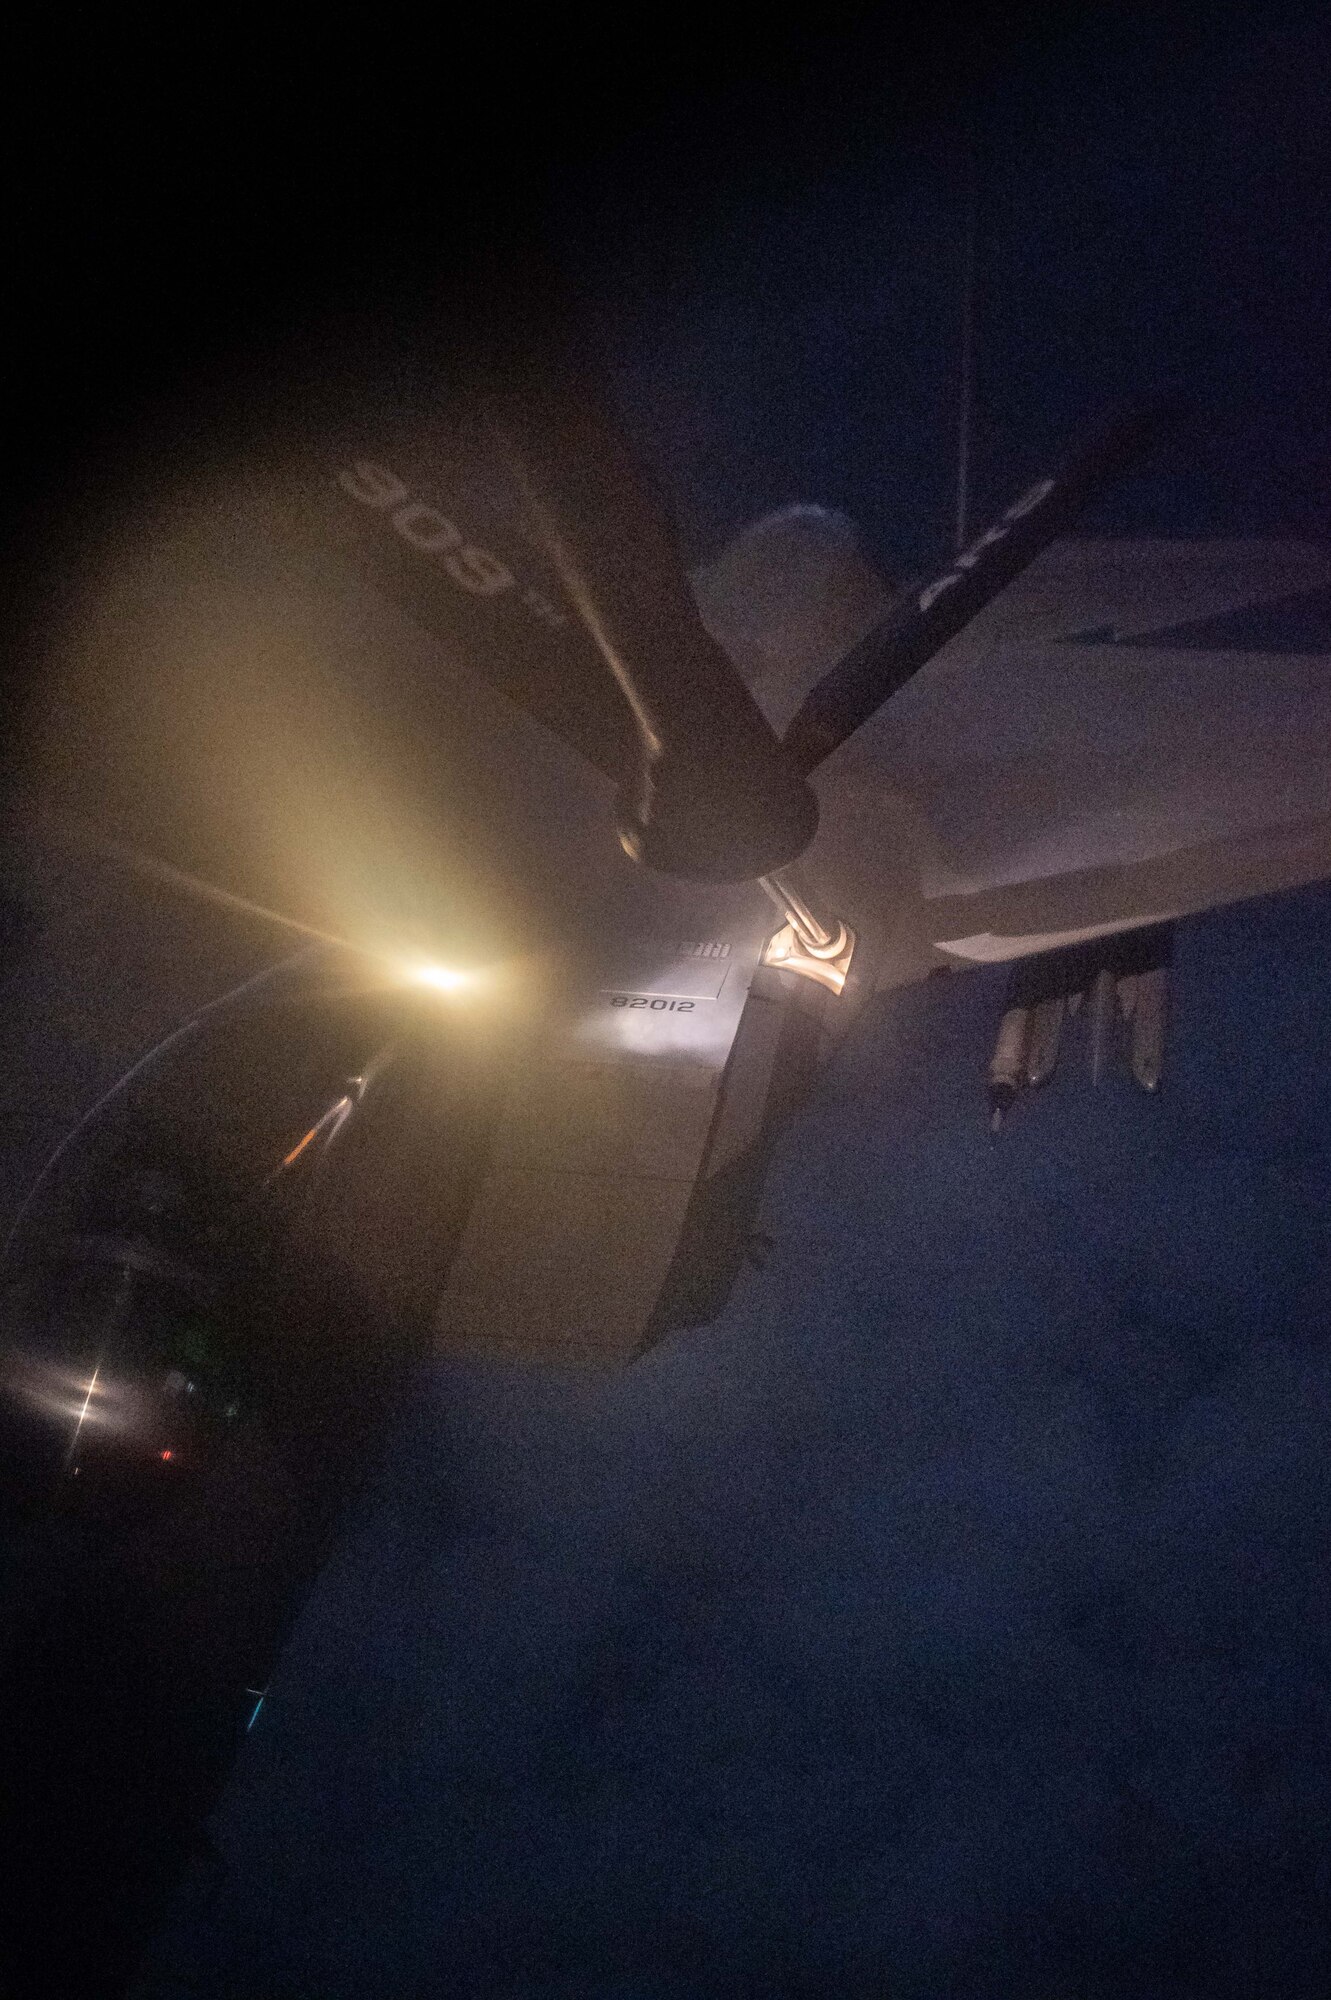 A fighter jet receives fuel from a refueling plane at night